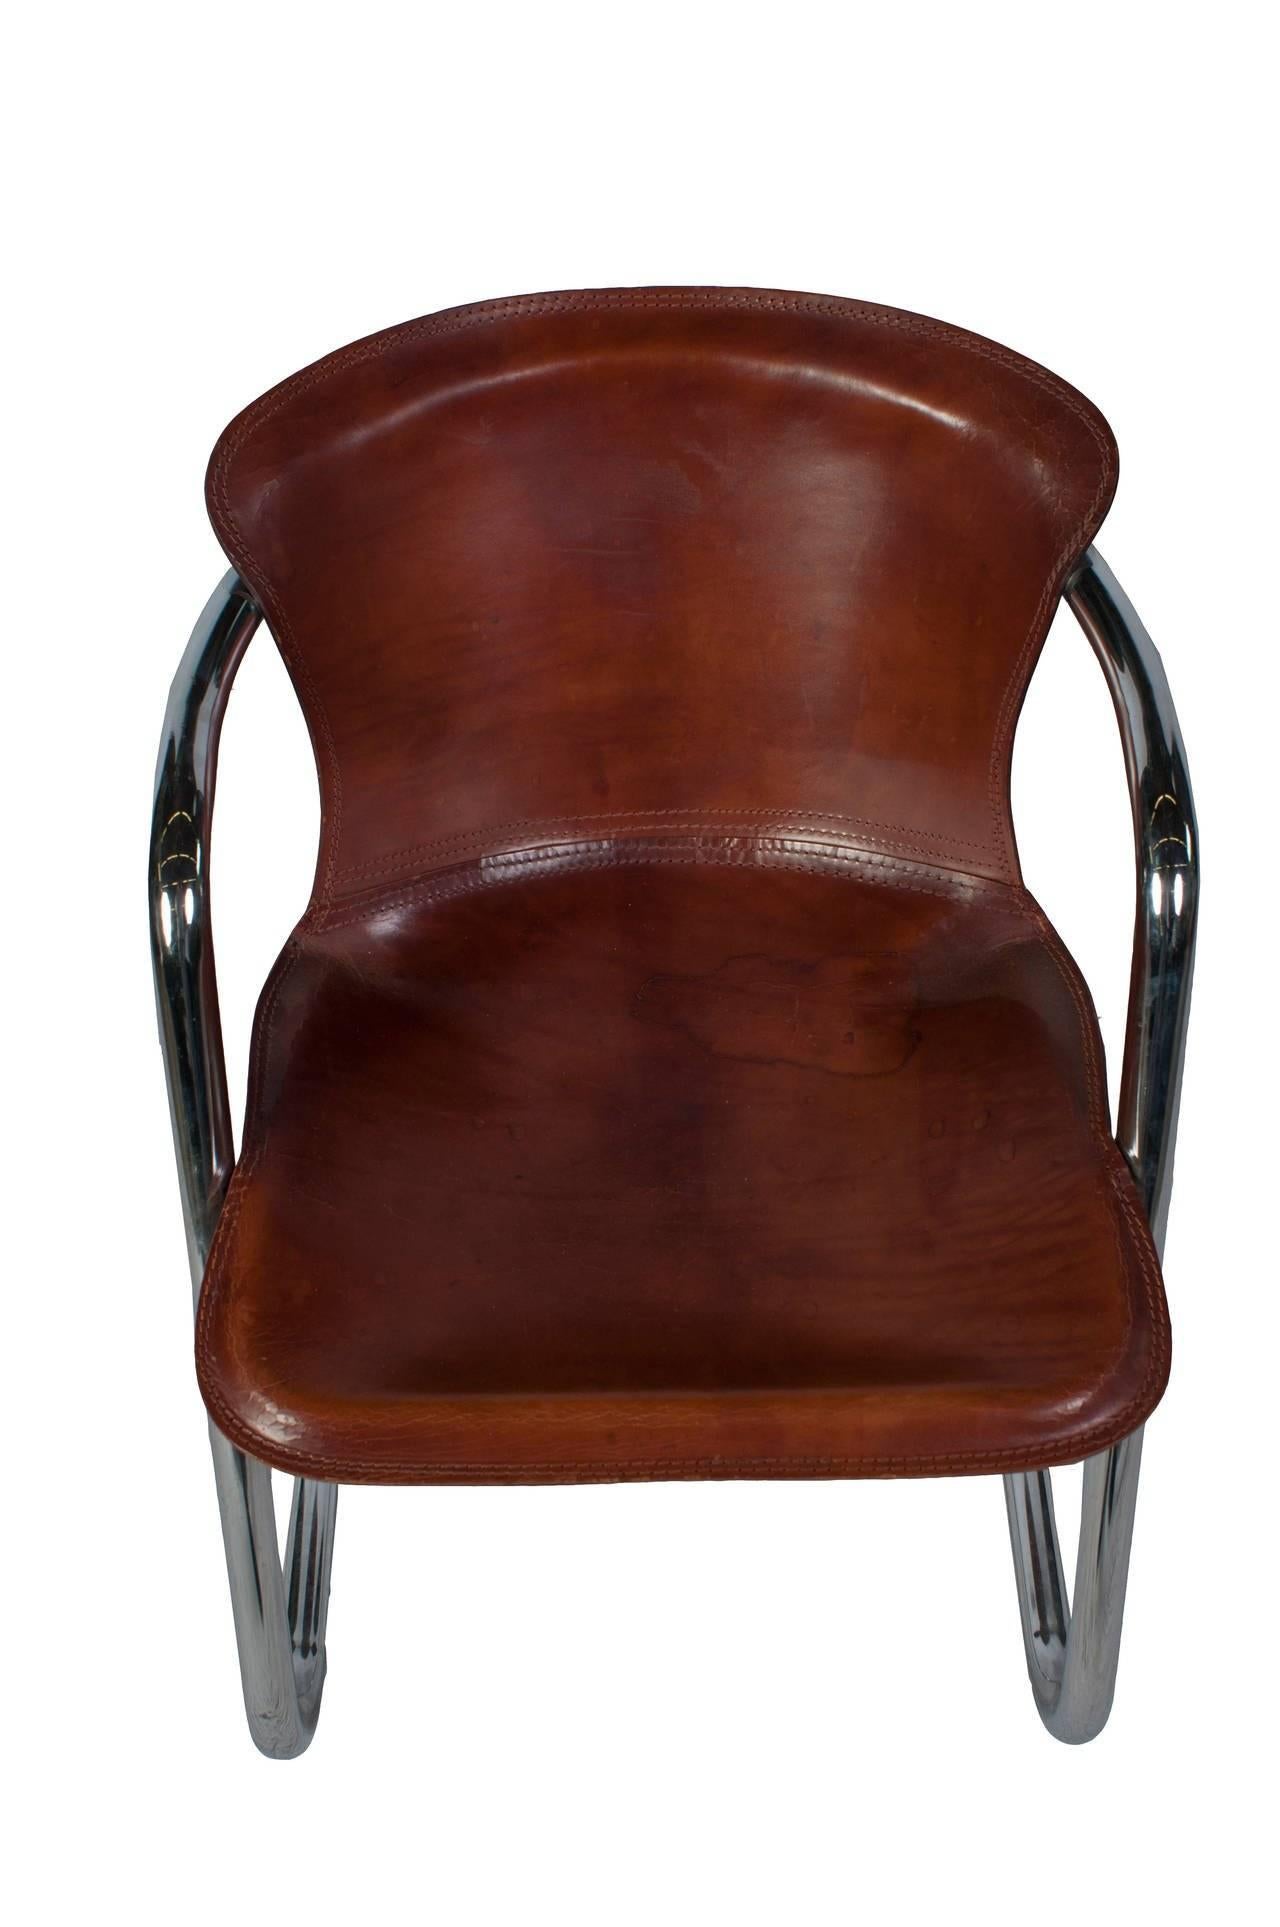 willy rizzo chair